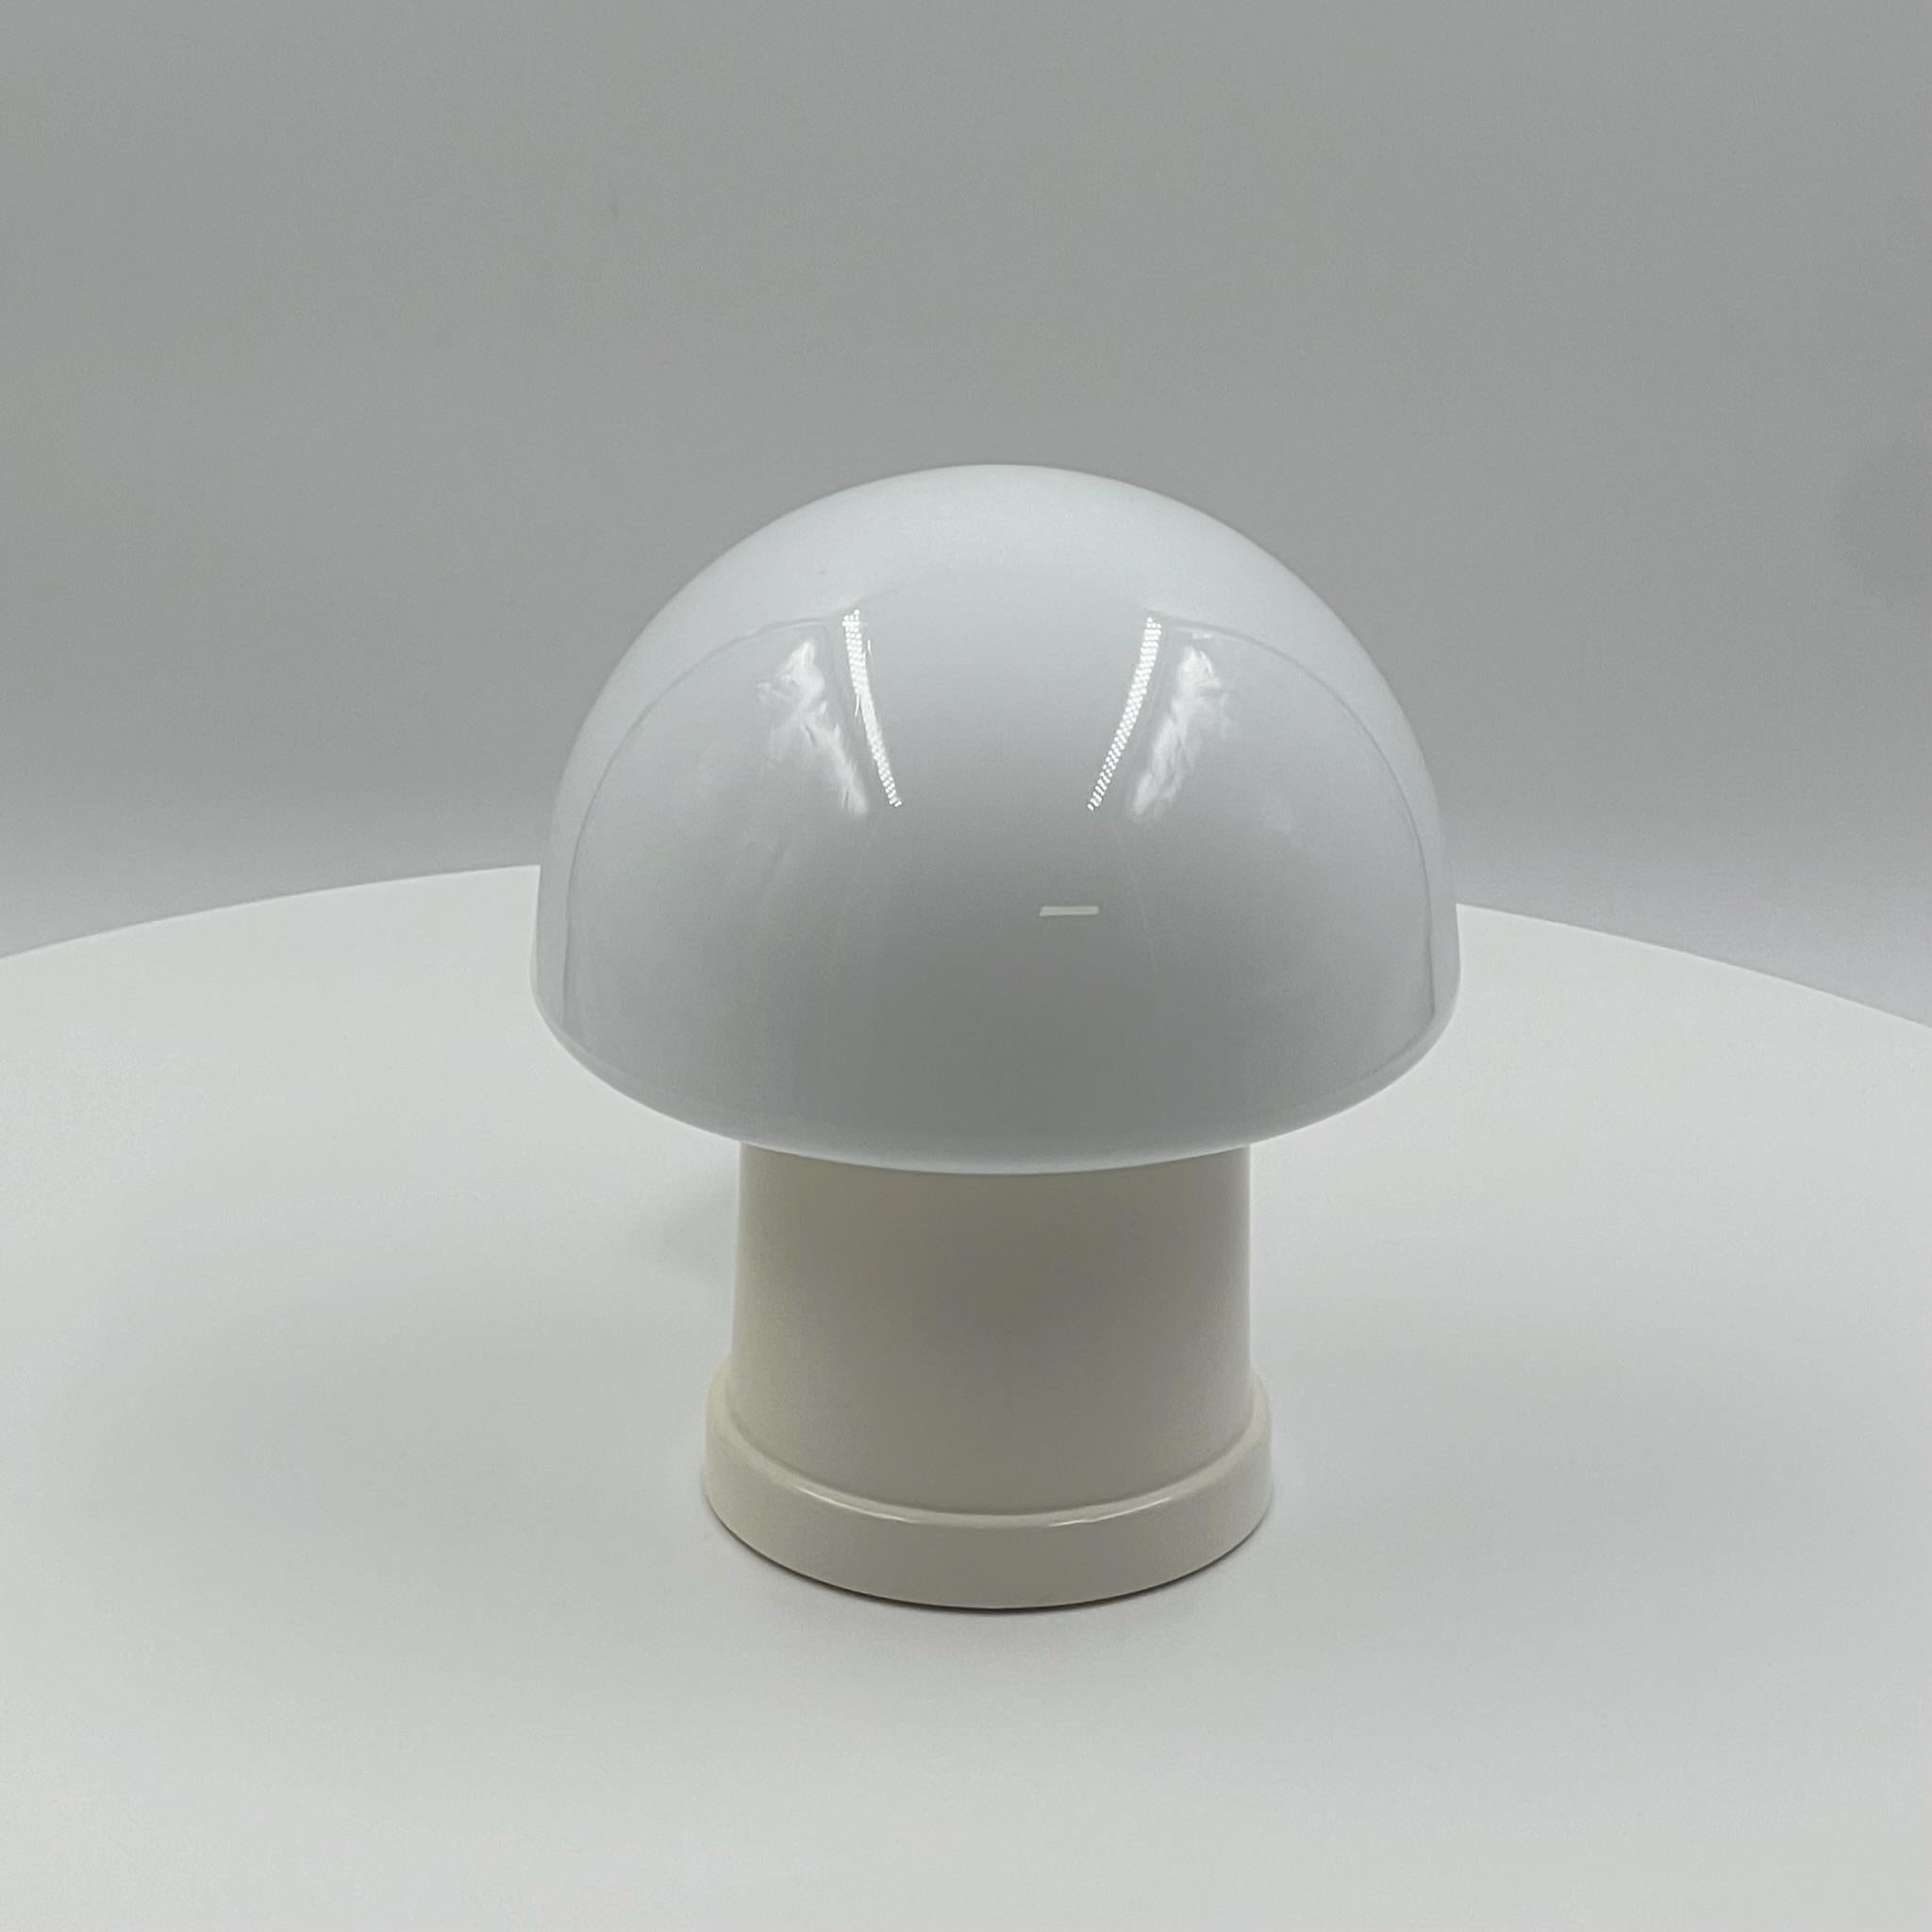 Spruce up your space with retro charm using this stunning mushroom 70s lamp crafted by Massive, Belgium, in the 1970s. Boasting the iconic mushroom shape that epitomizes 70s design, this lamp is a true masterpiece of minimalistic elegance.

The lamp